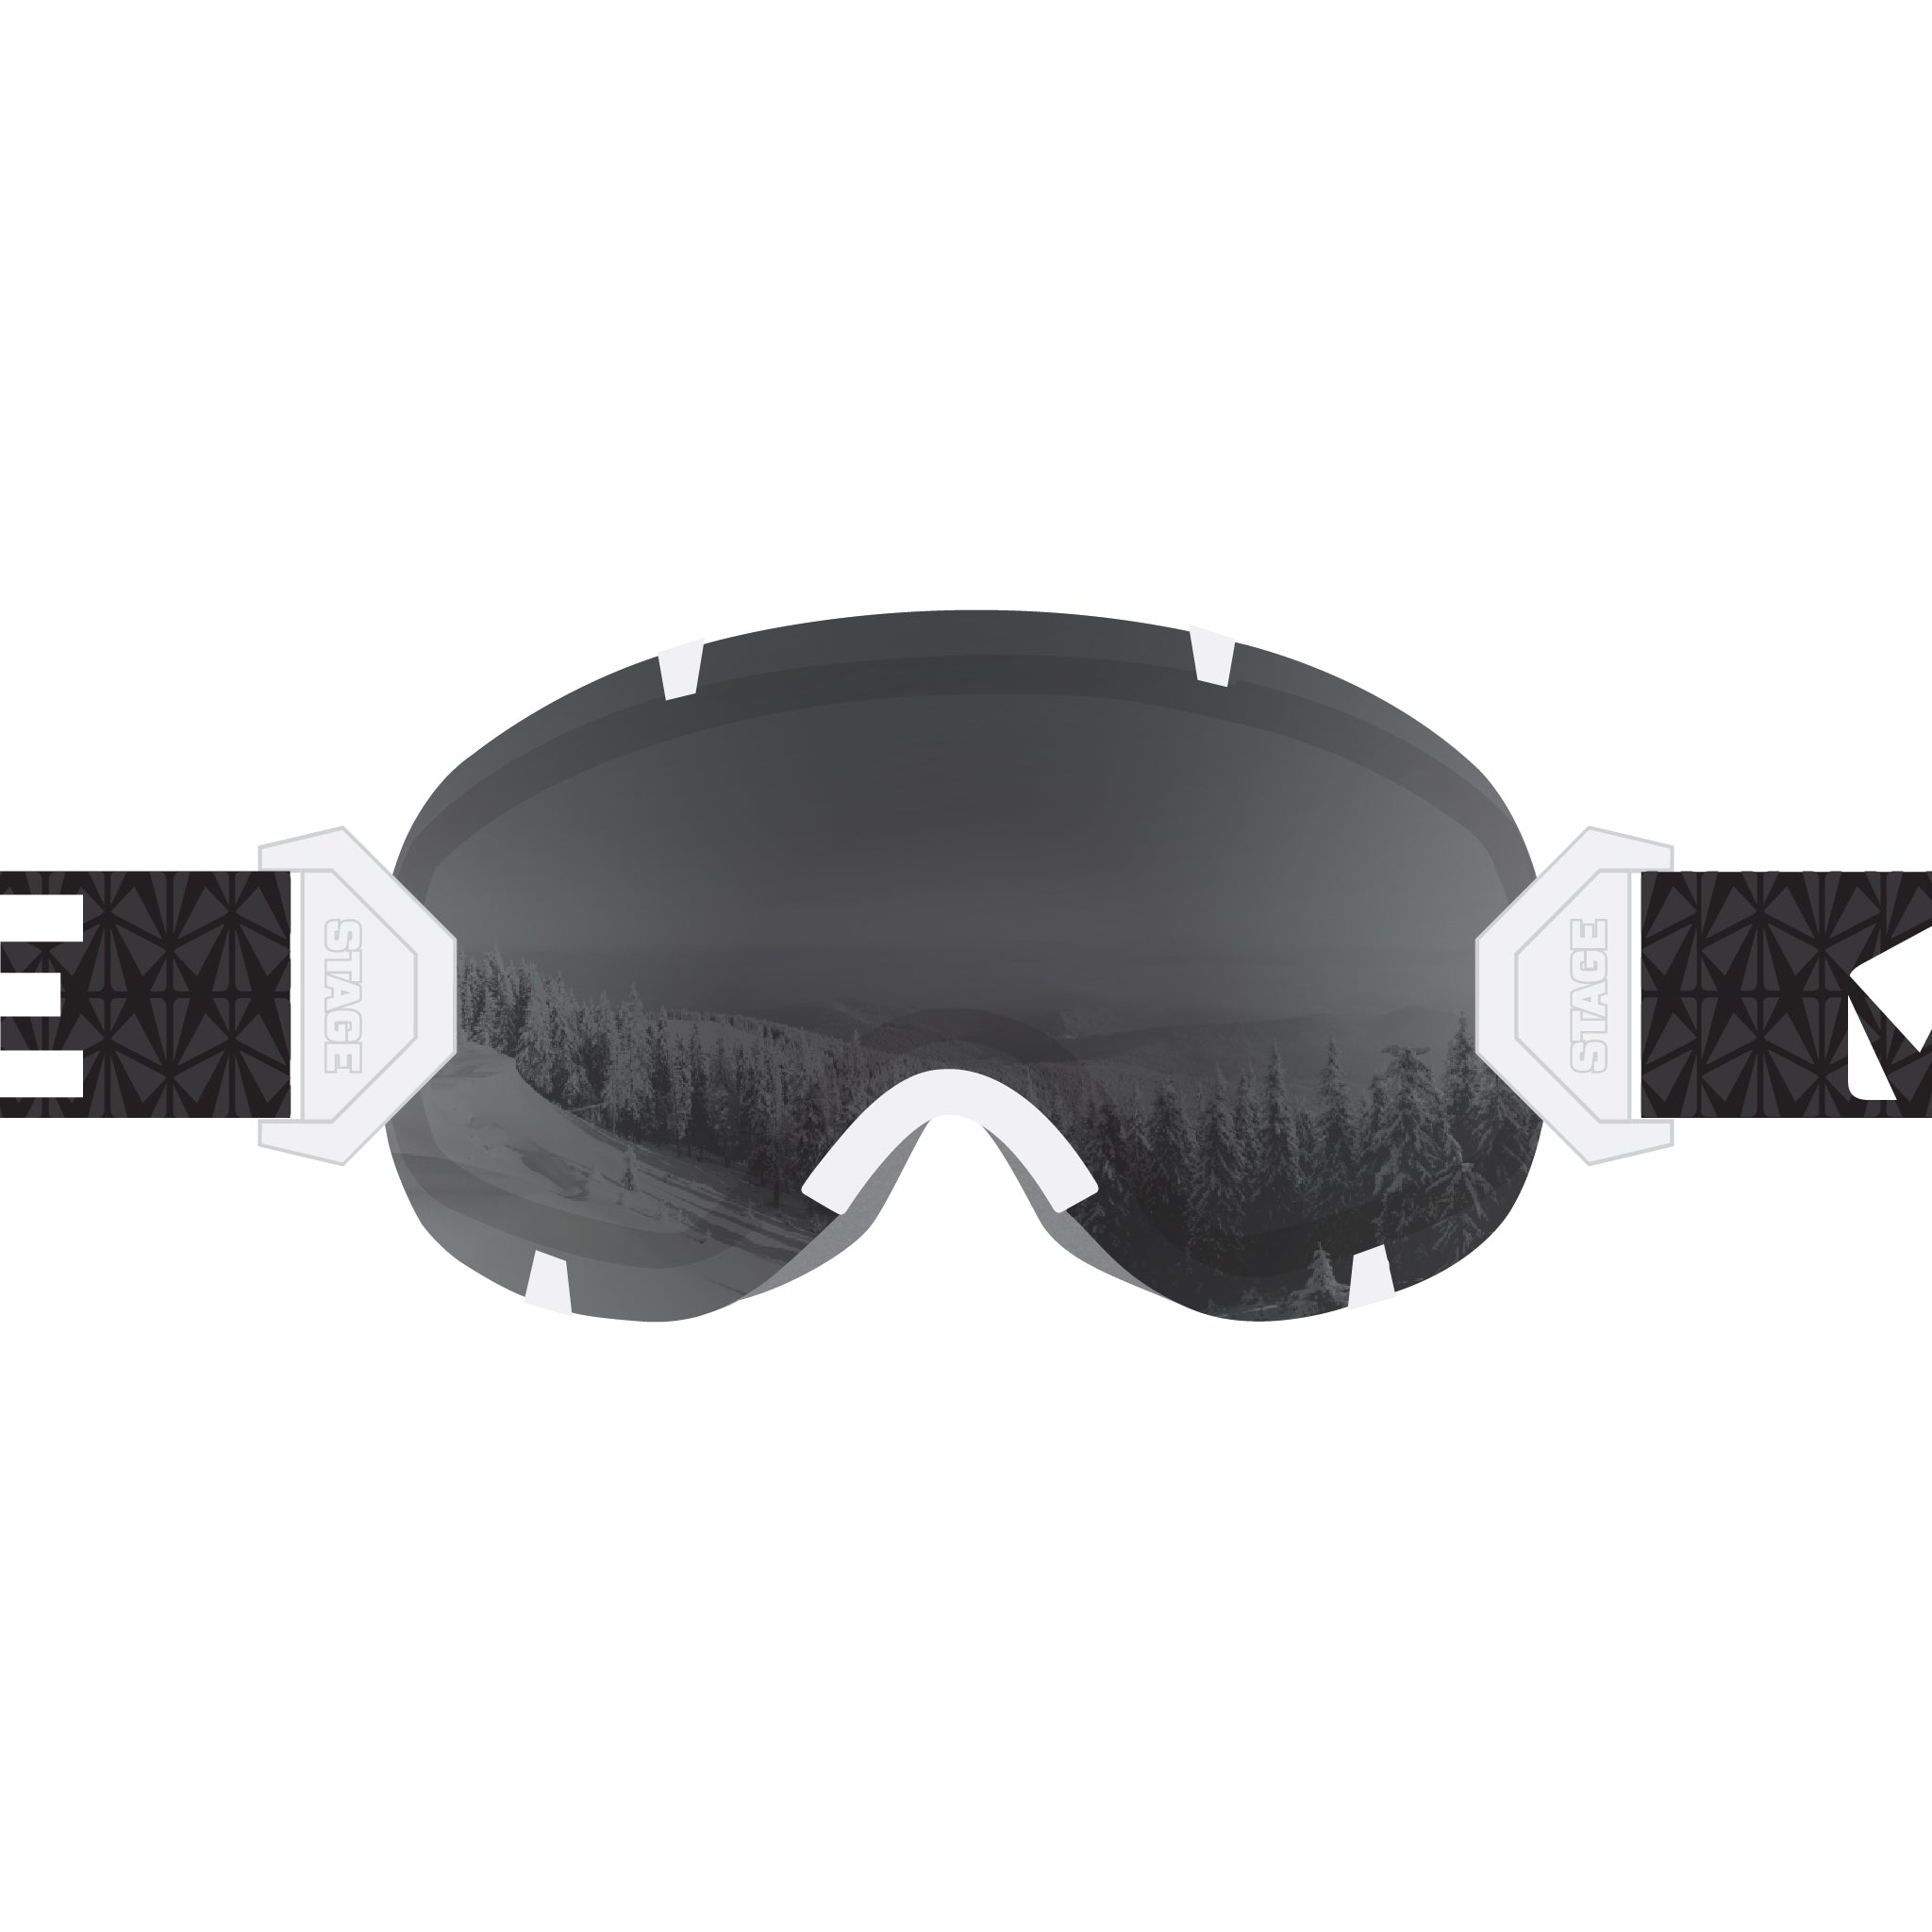 STAGE Stunt Ski Goggle - and Interchangeable Black Strap Lens 